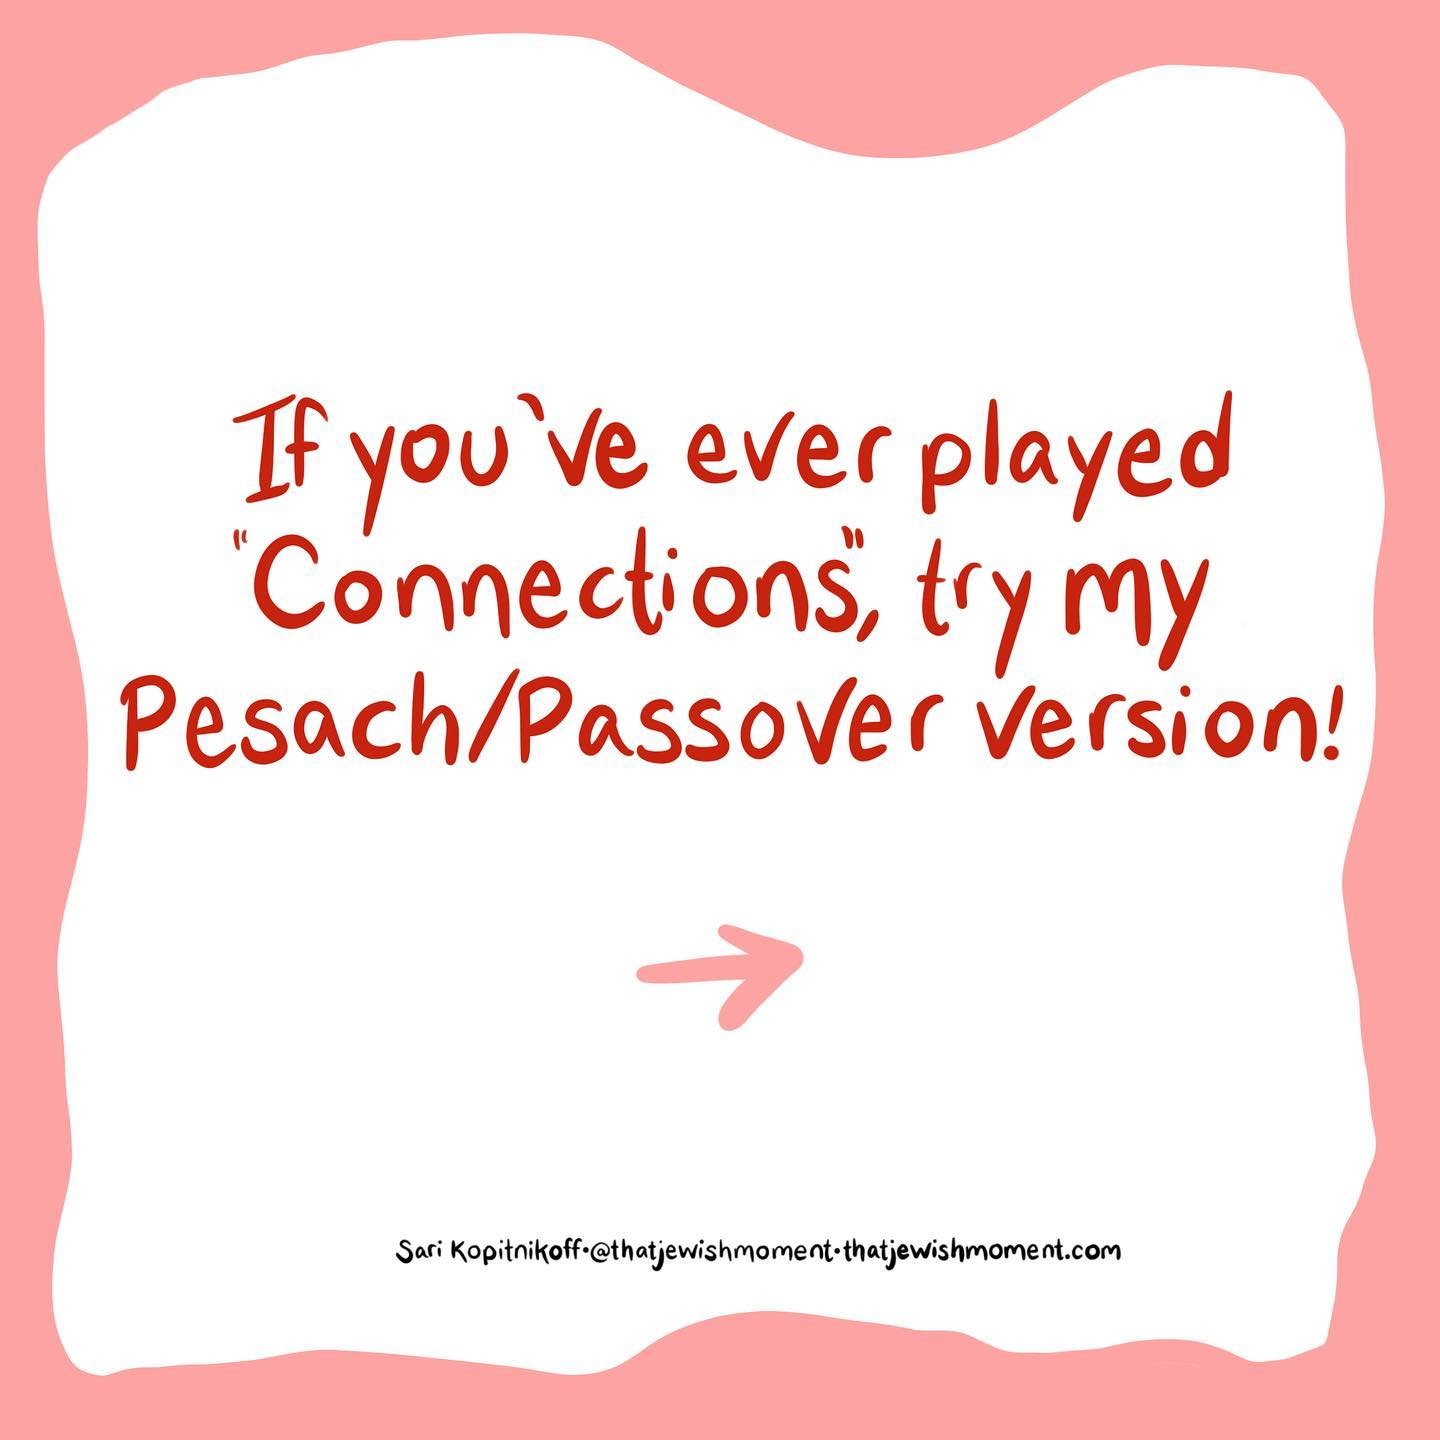 Whip it out when the Seder convo gets too heated 🤓  #seder #passover #pesach #jewish #connections #sedergame